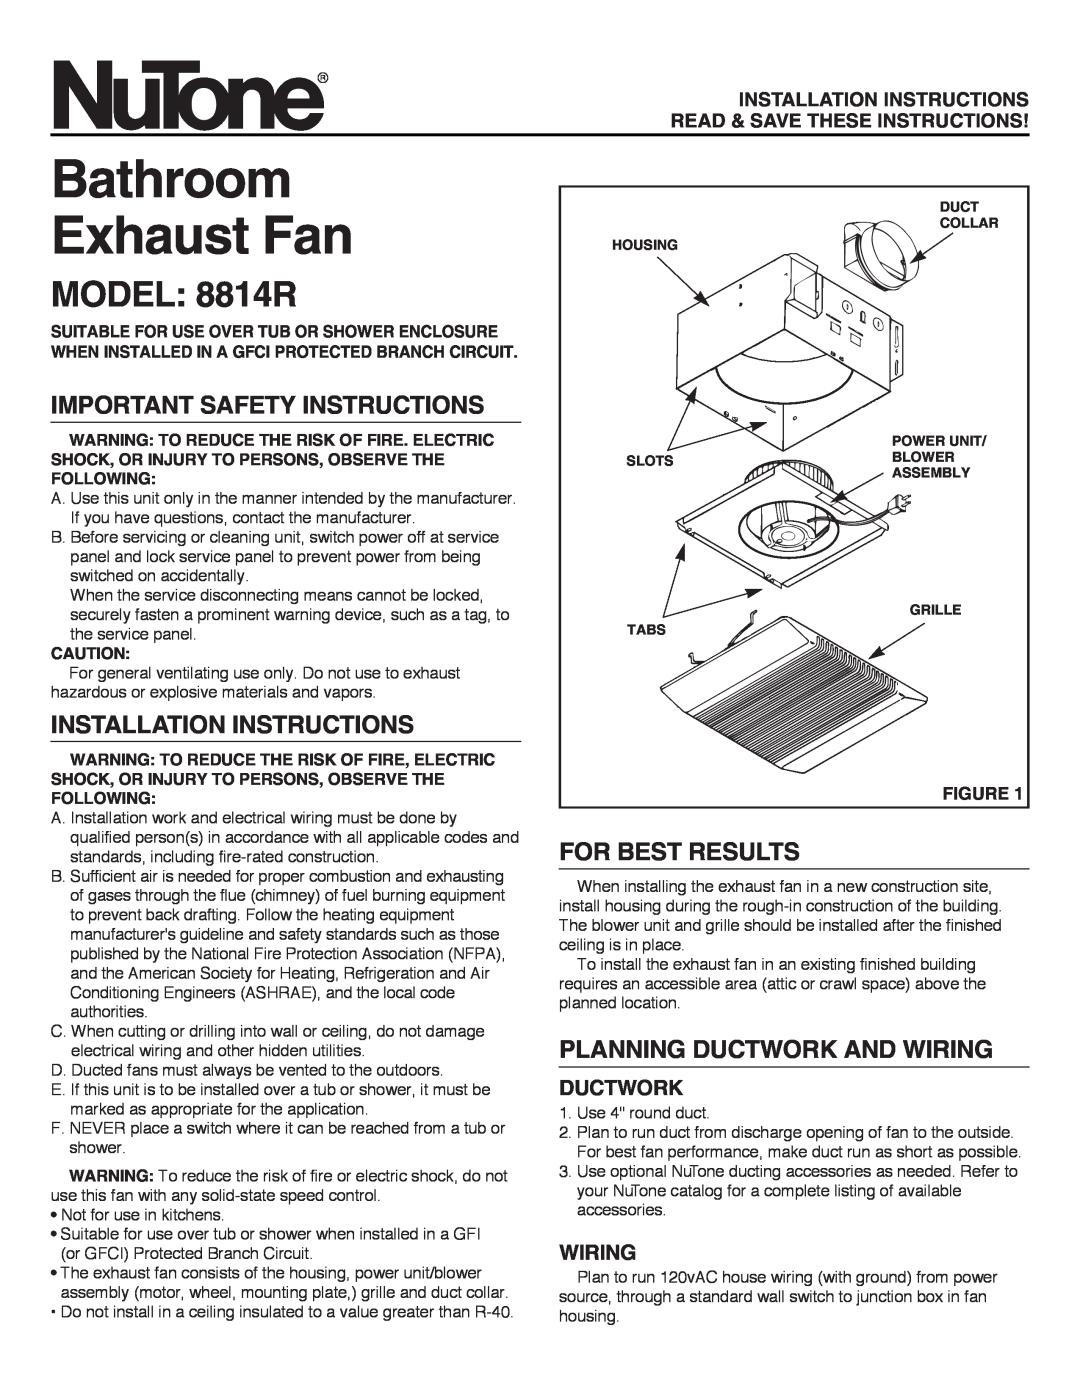 NuTone installation instructions Bathroom Exhaust Fan, MODEL 8814R, Important Safety Instructions, For Best Results 